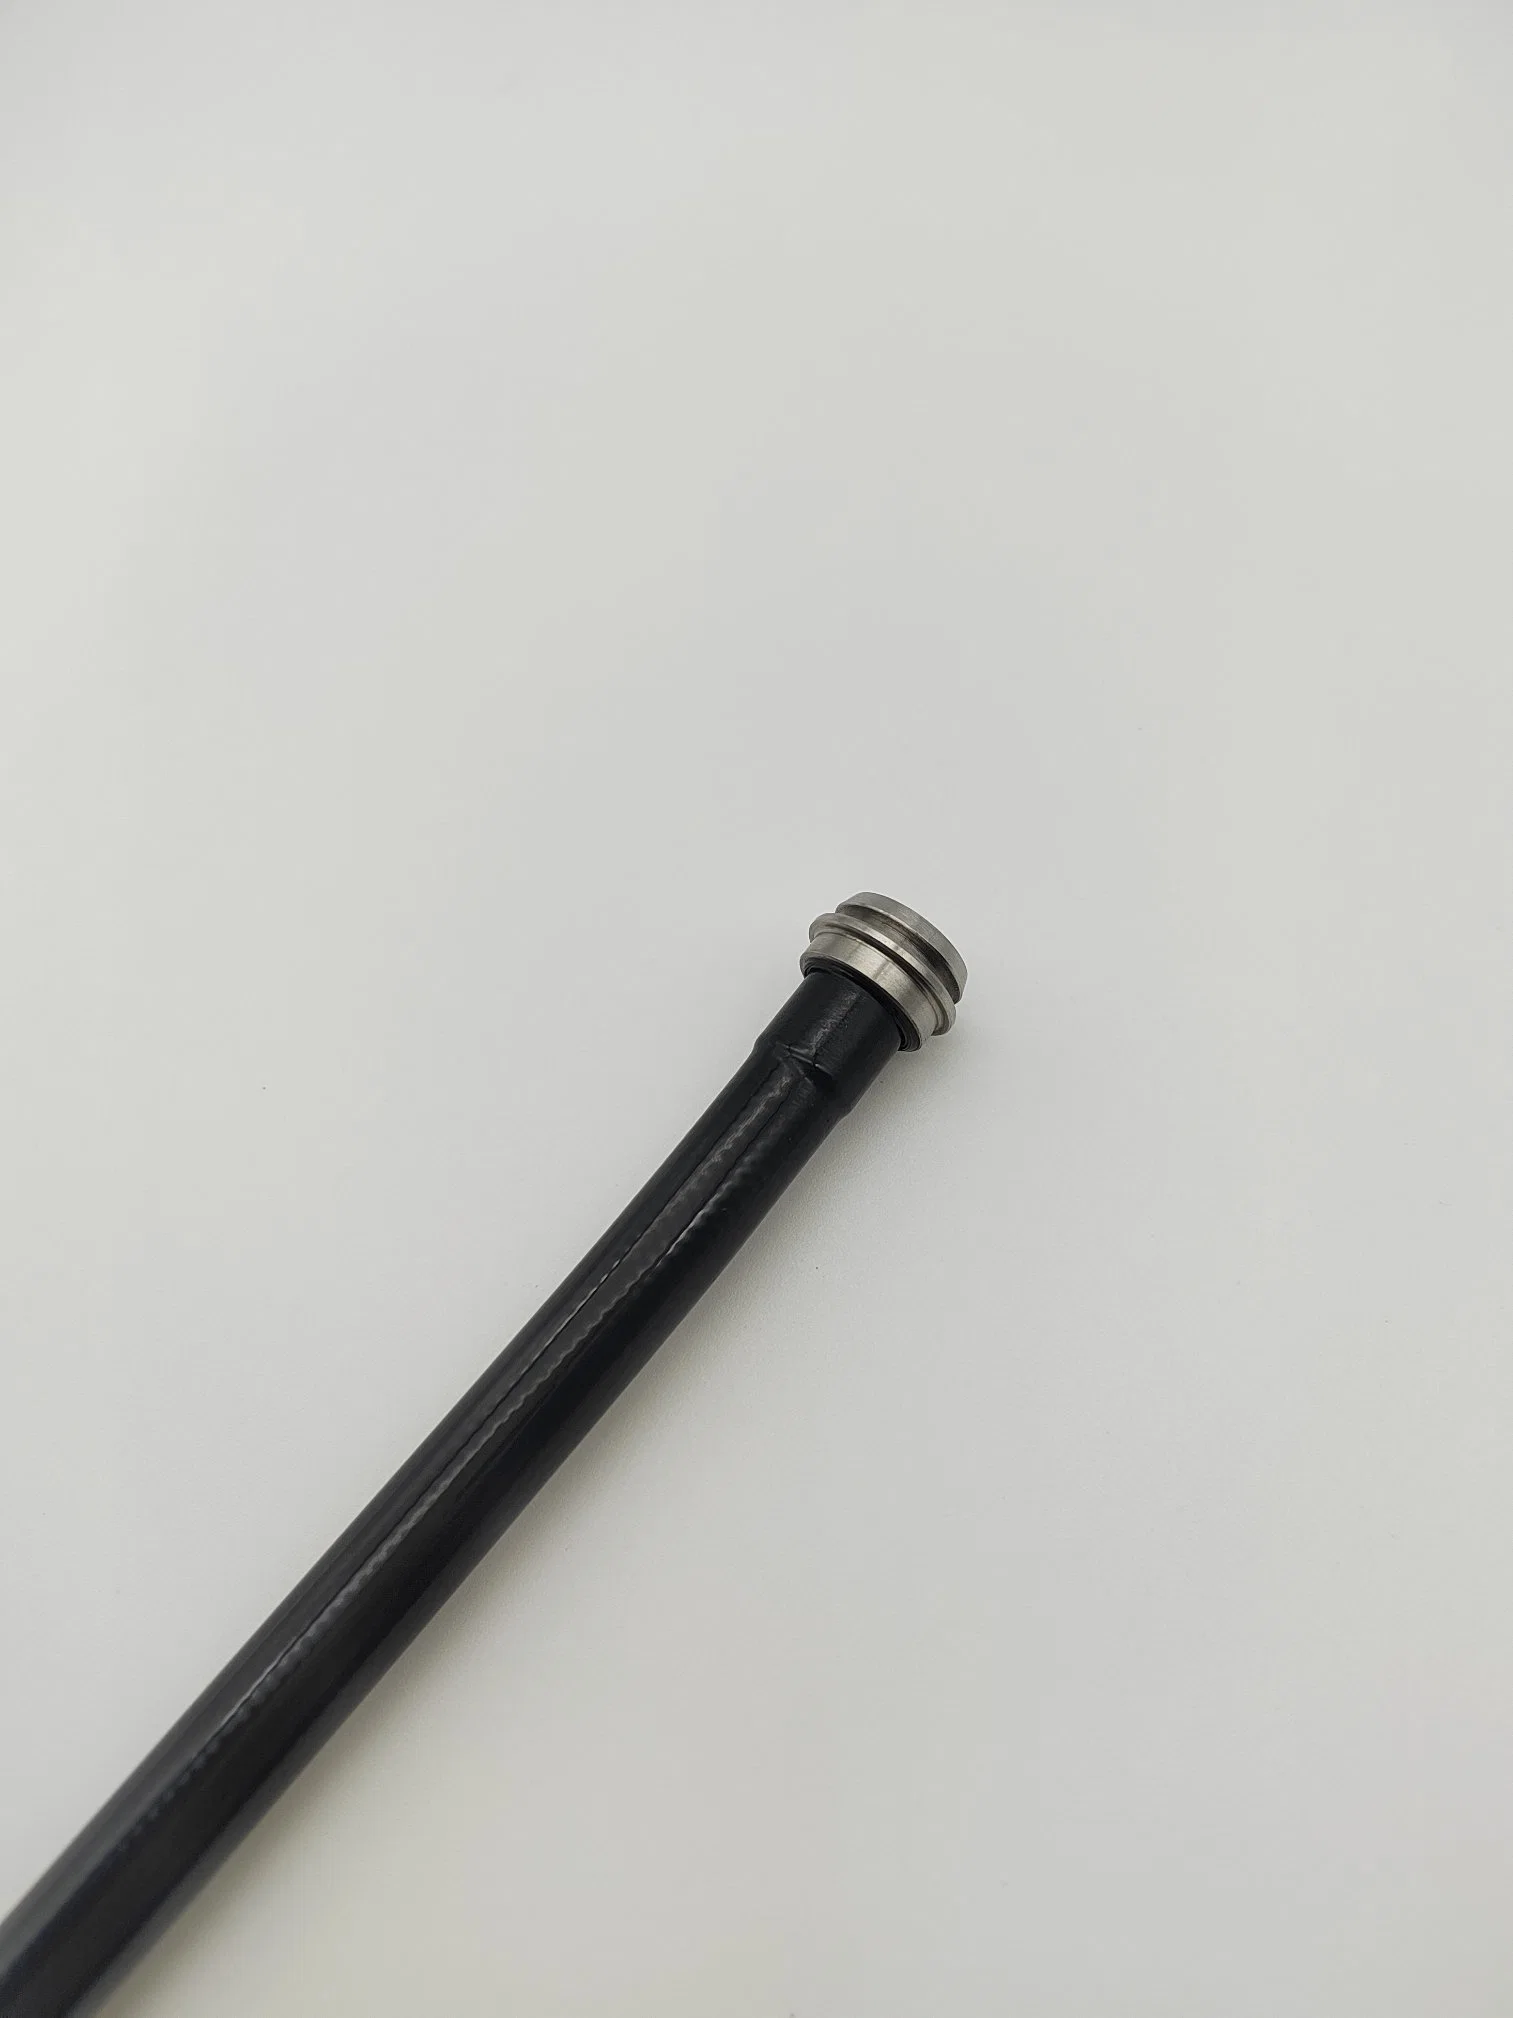 Insertion Tube for Pentax Fd34W Endoscope